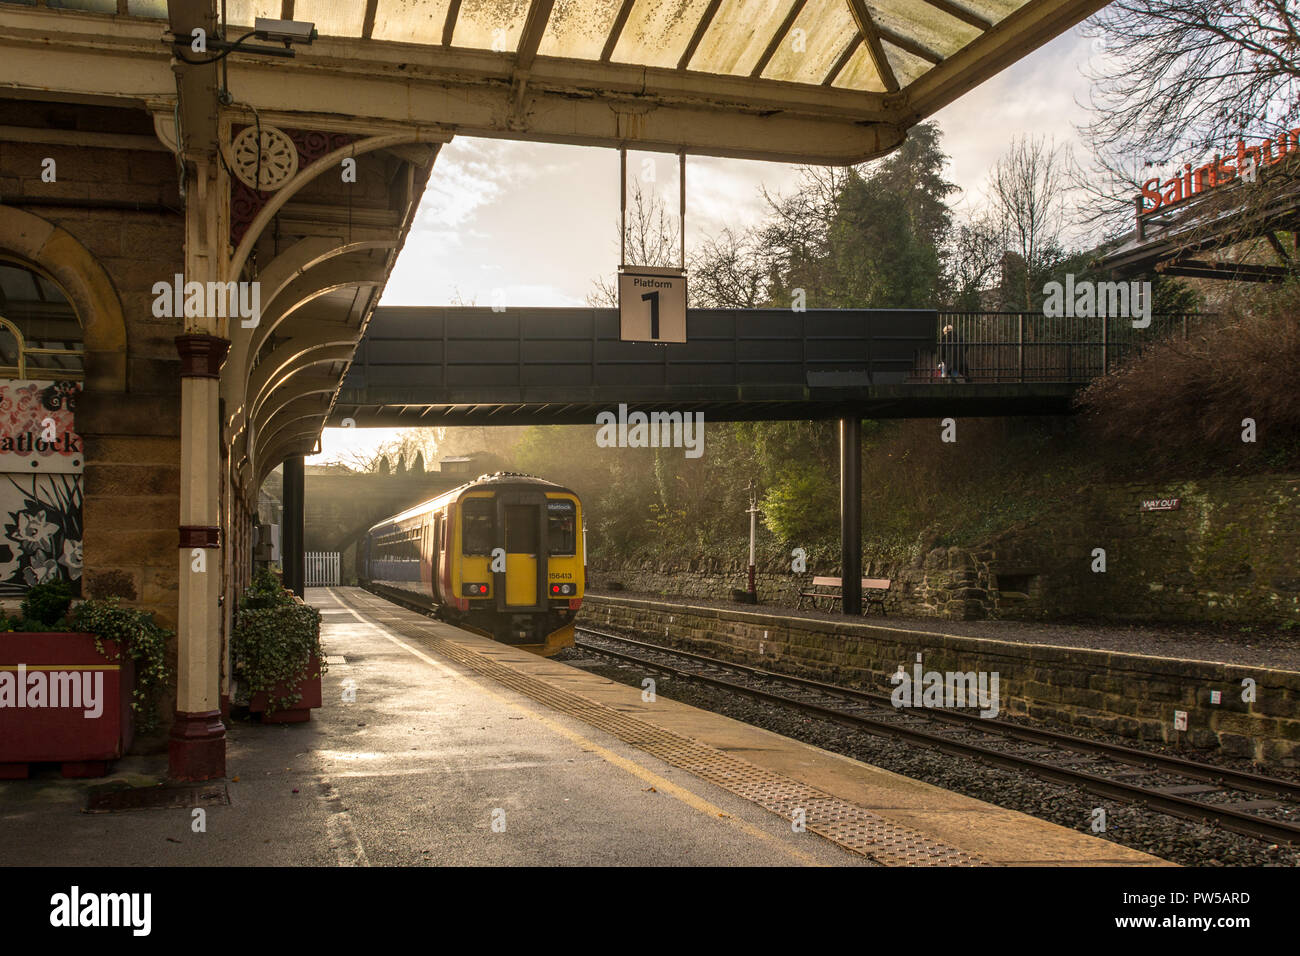 Old Matlock Train Station with a train going back to Nottingham Stock Photo